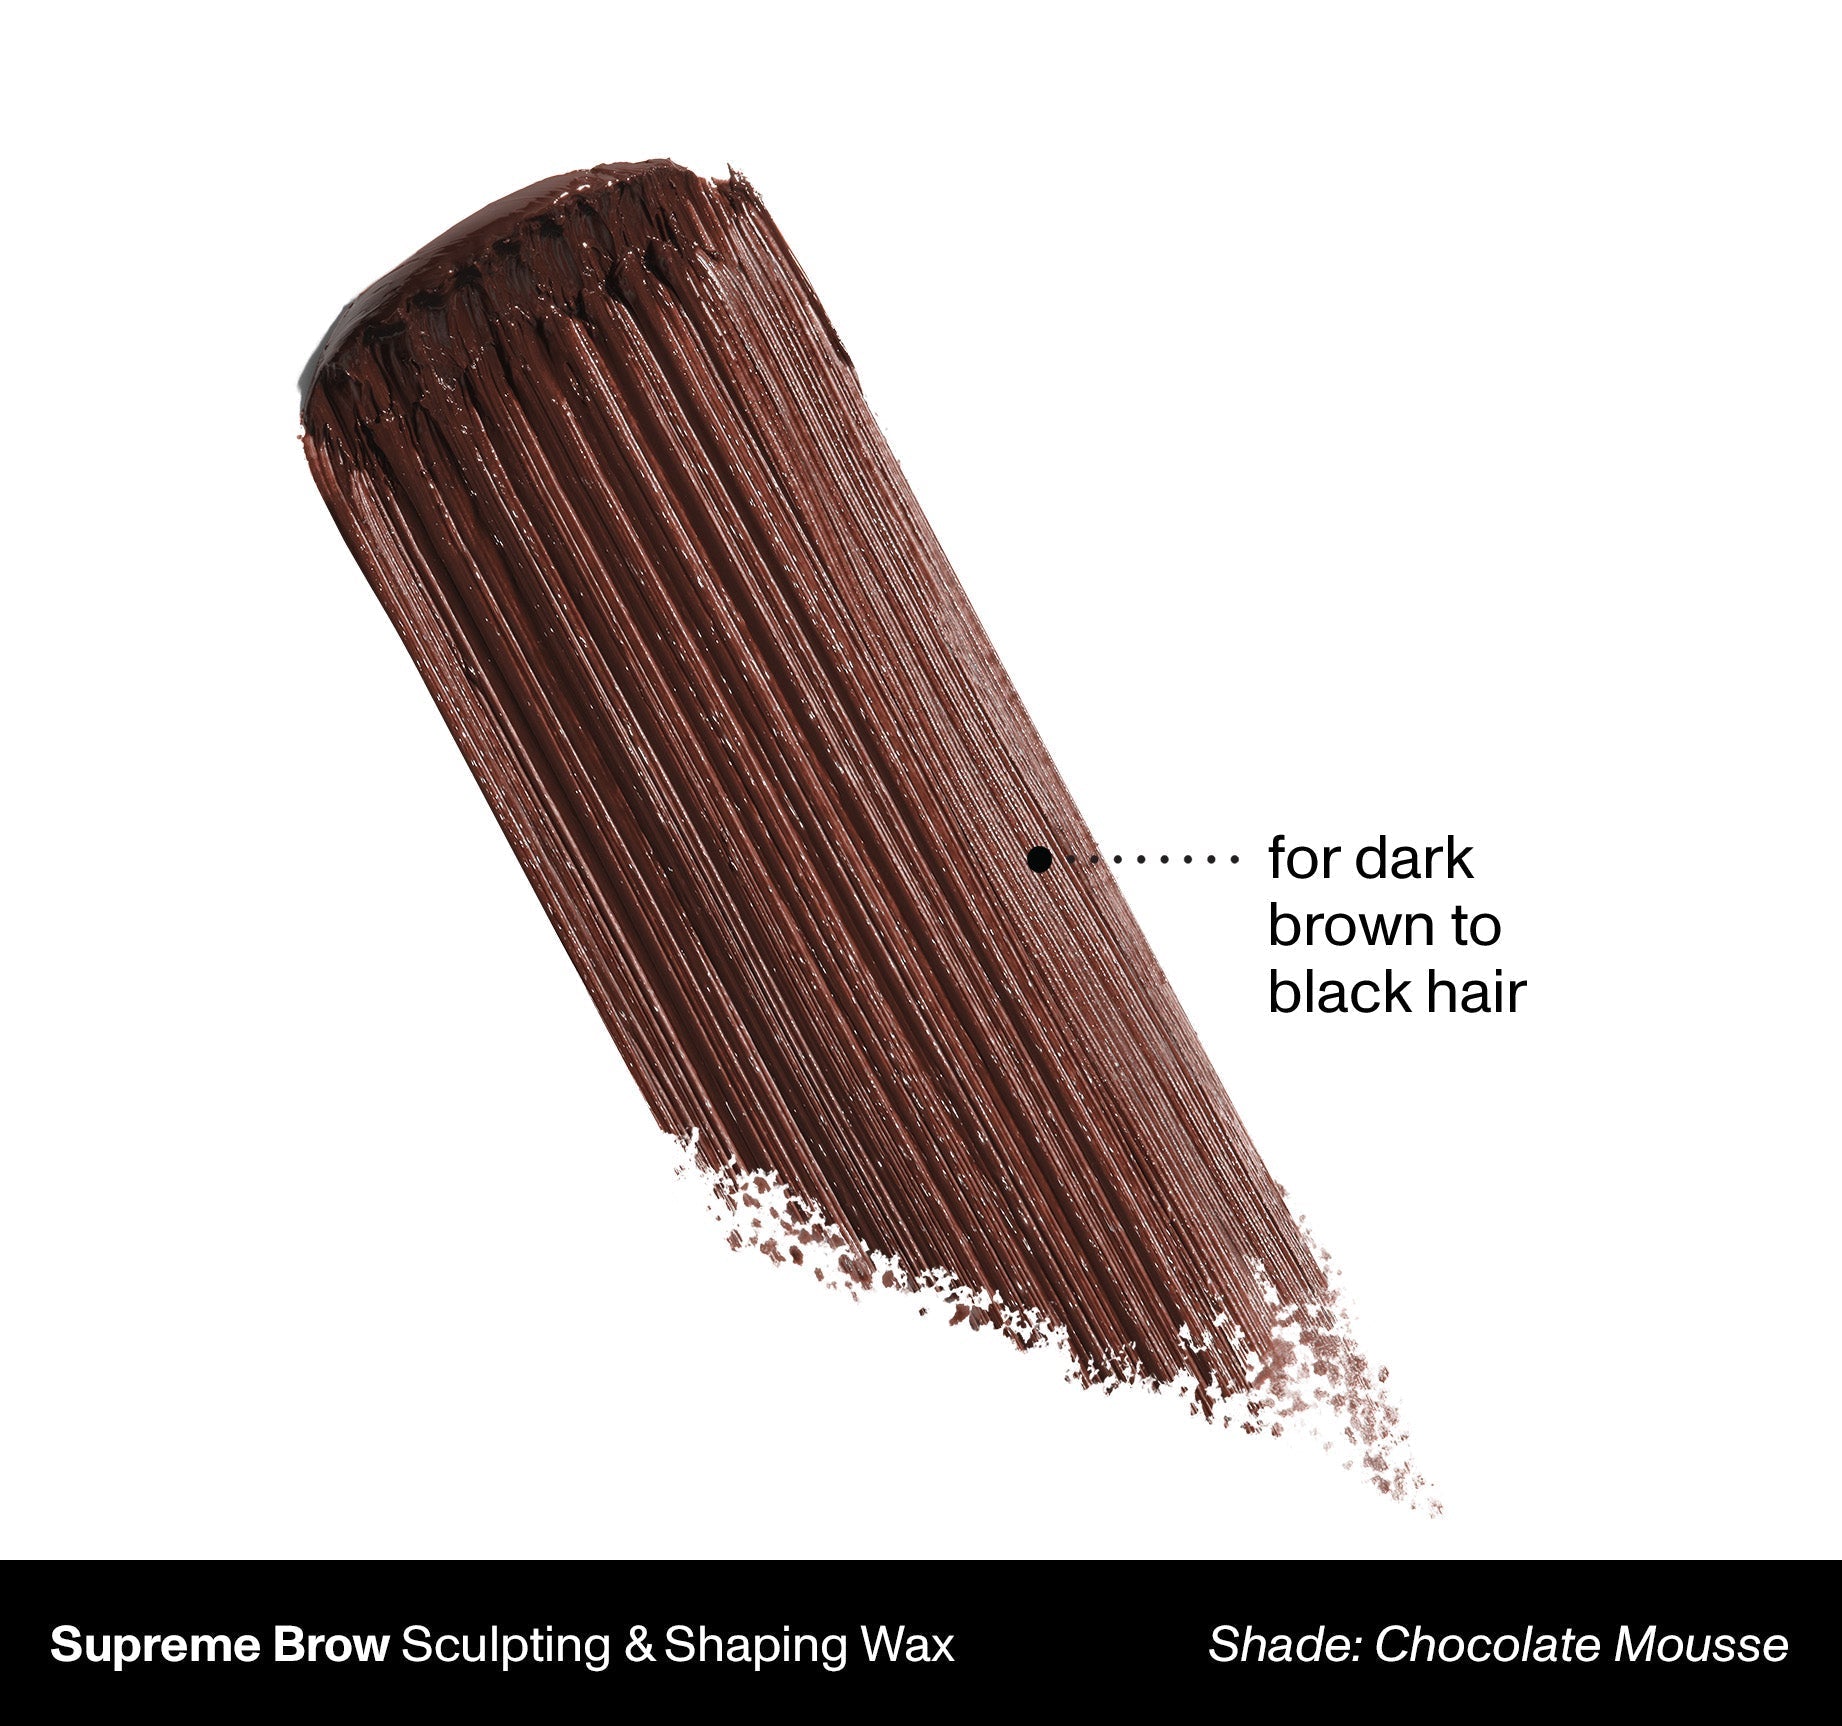 Supreme Brow Sculpting And Shaping Wax - Chocolate Mousse - Image 2